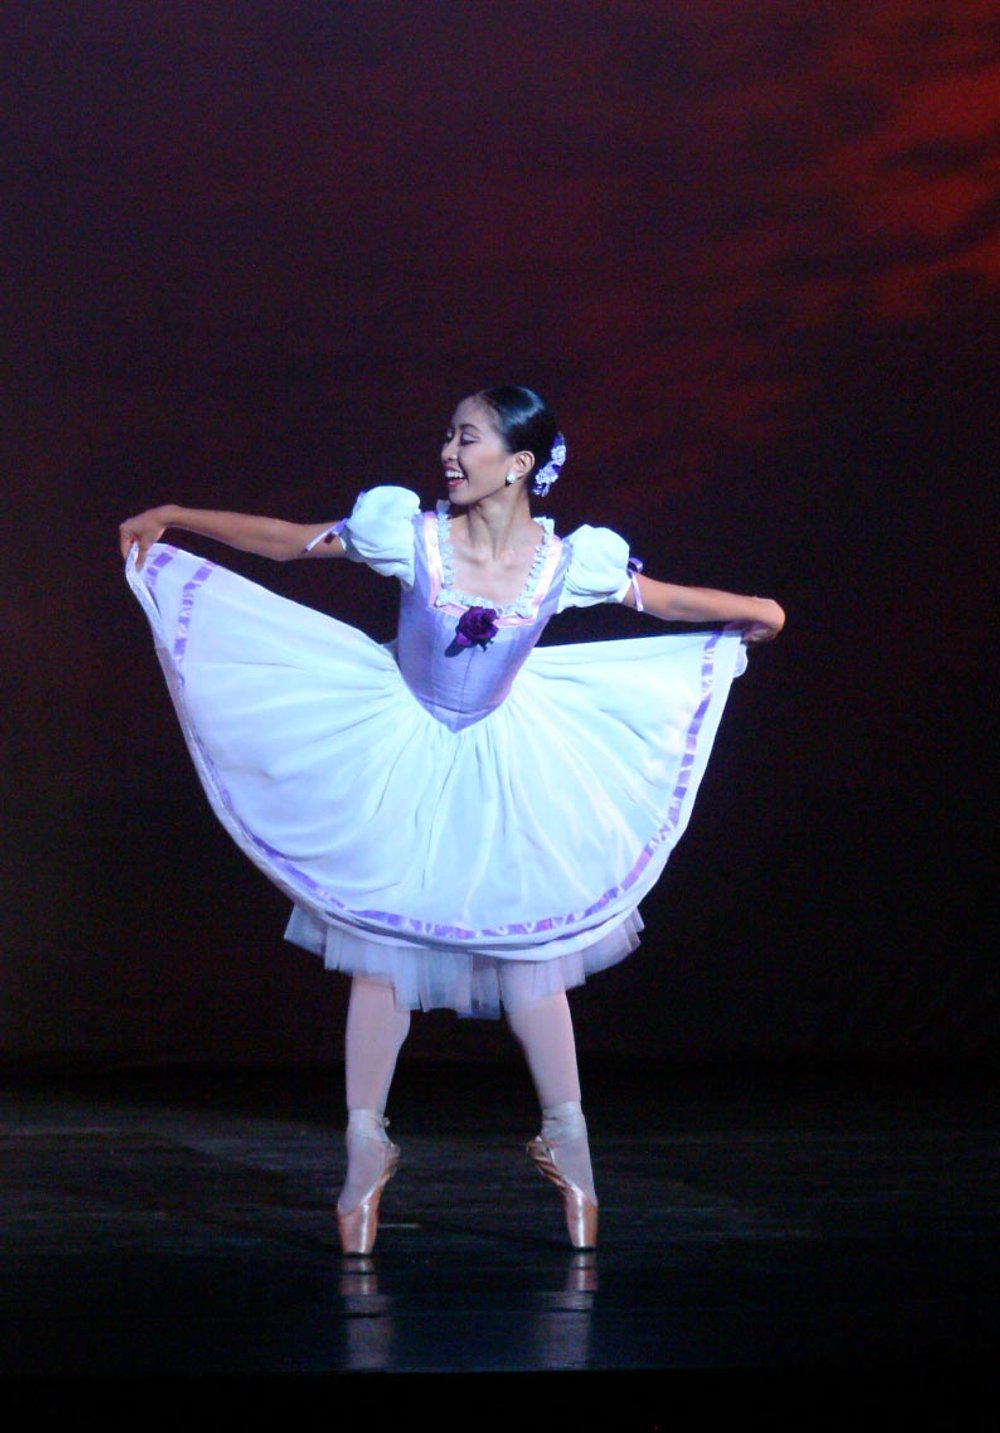    Holding up the skirt of her lilac and white tutu, Marian Faustino is playful and full of energy as she dances the solo part in August Bournonville’s  Kermesse in Bruges  pas de deux. The piece was performed in  OPM at OPB  (2003) where she was par